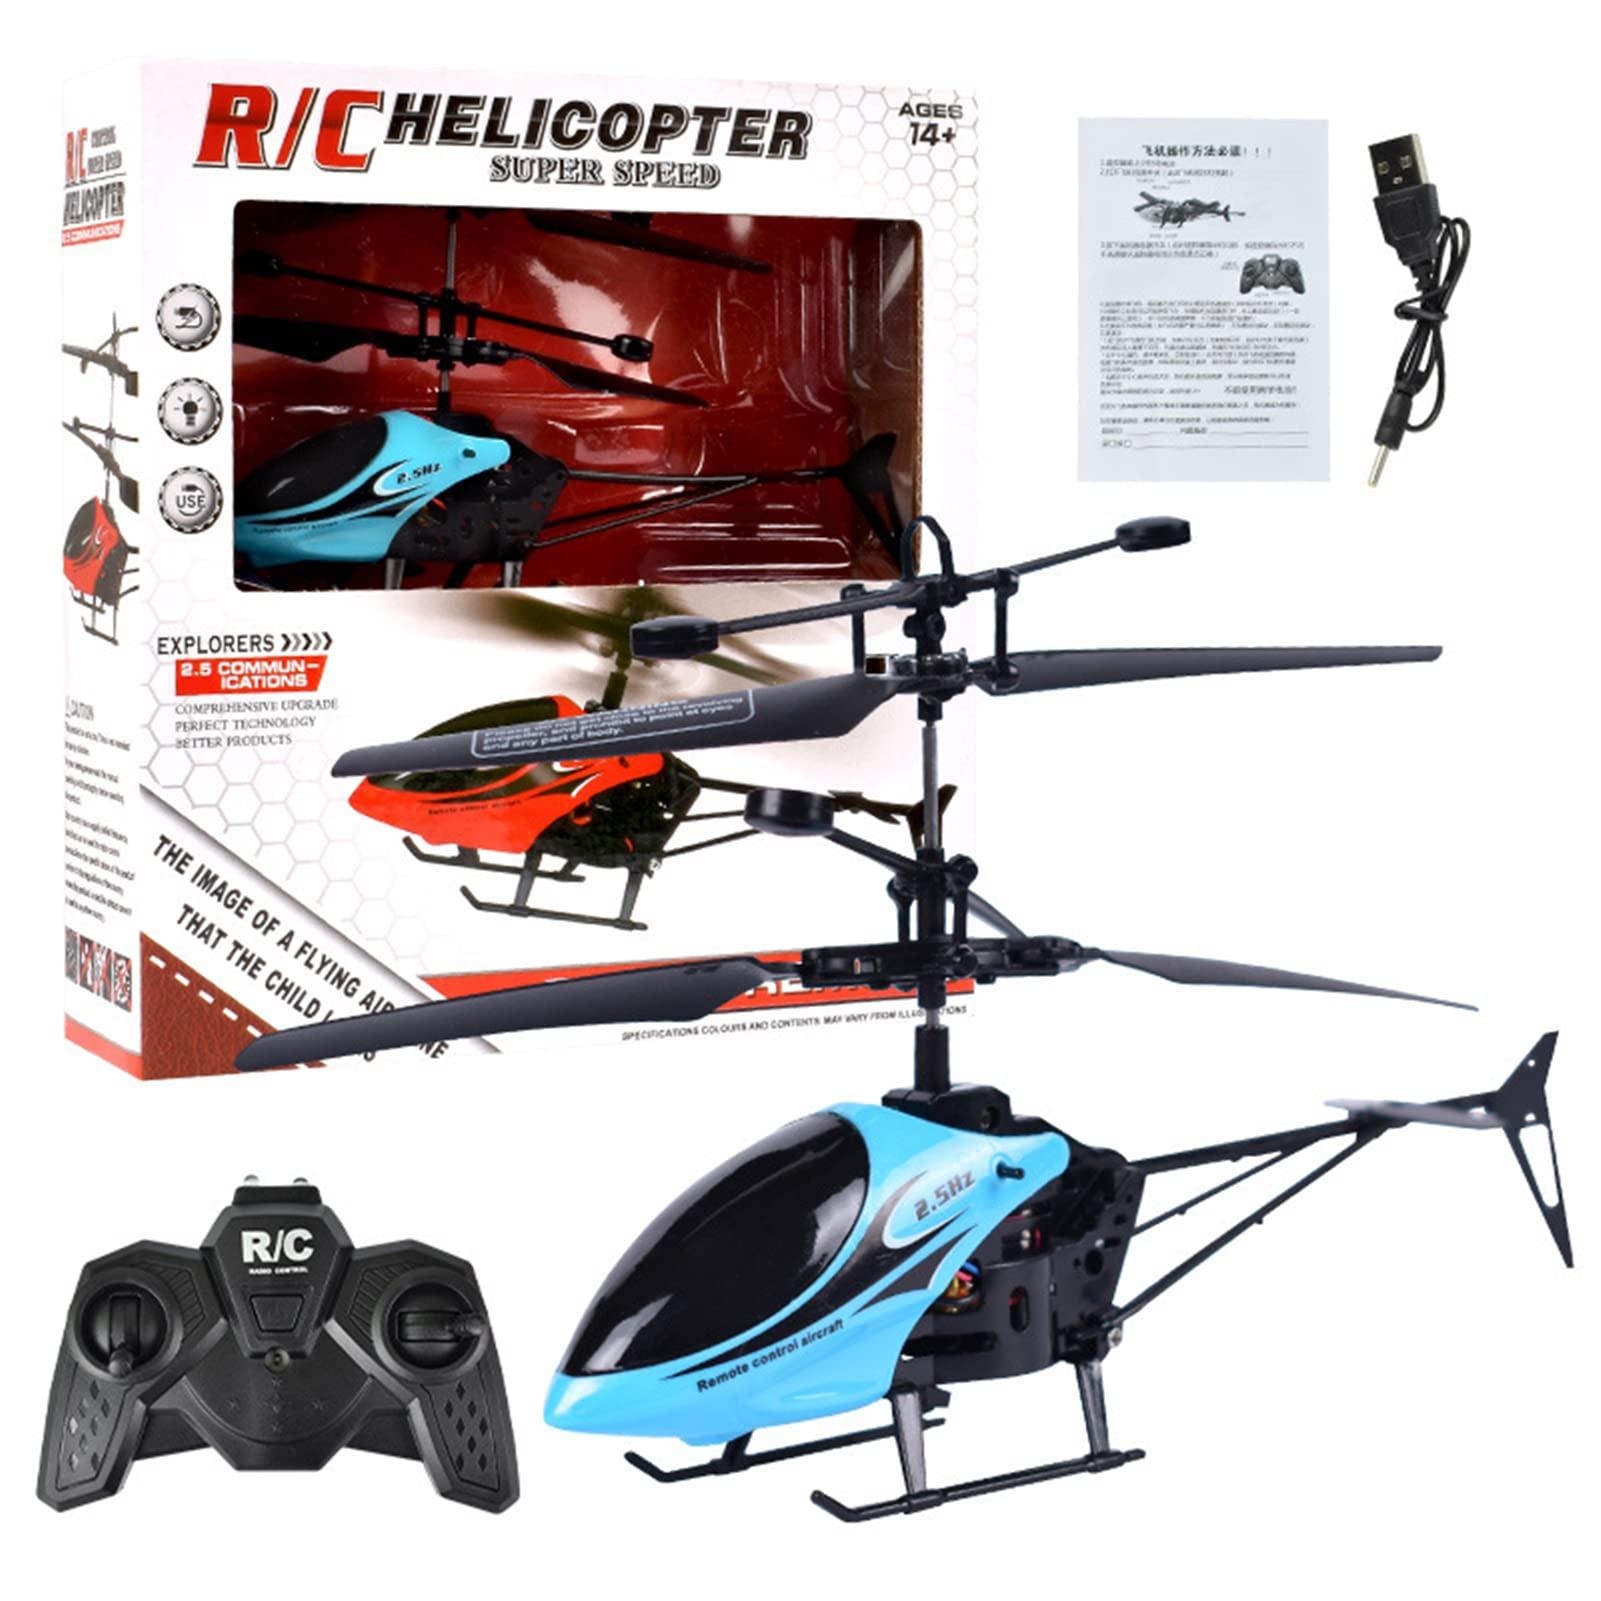 Remote Helicopter Remote Control Helicopter: Types and Features of Remote Control Helicopters